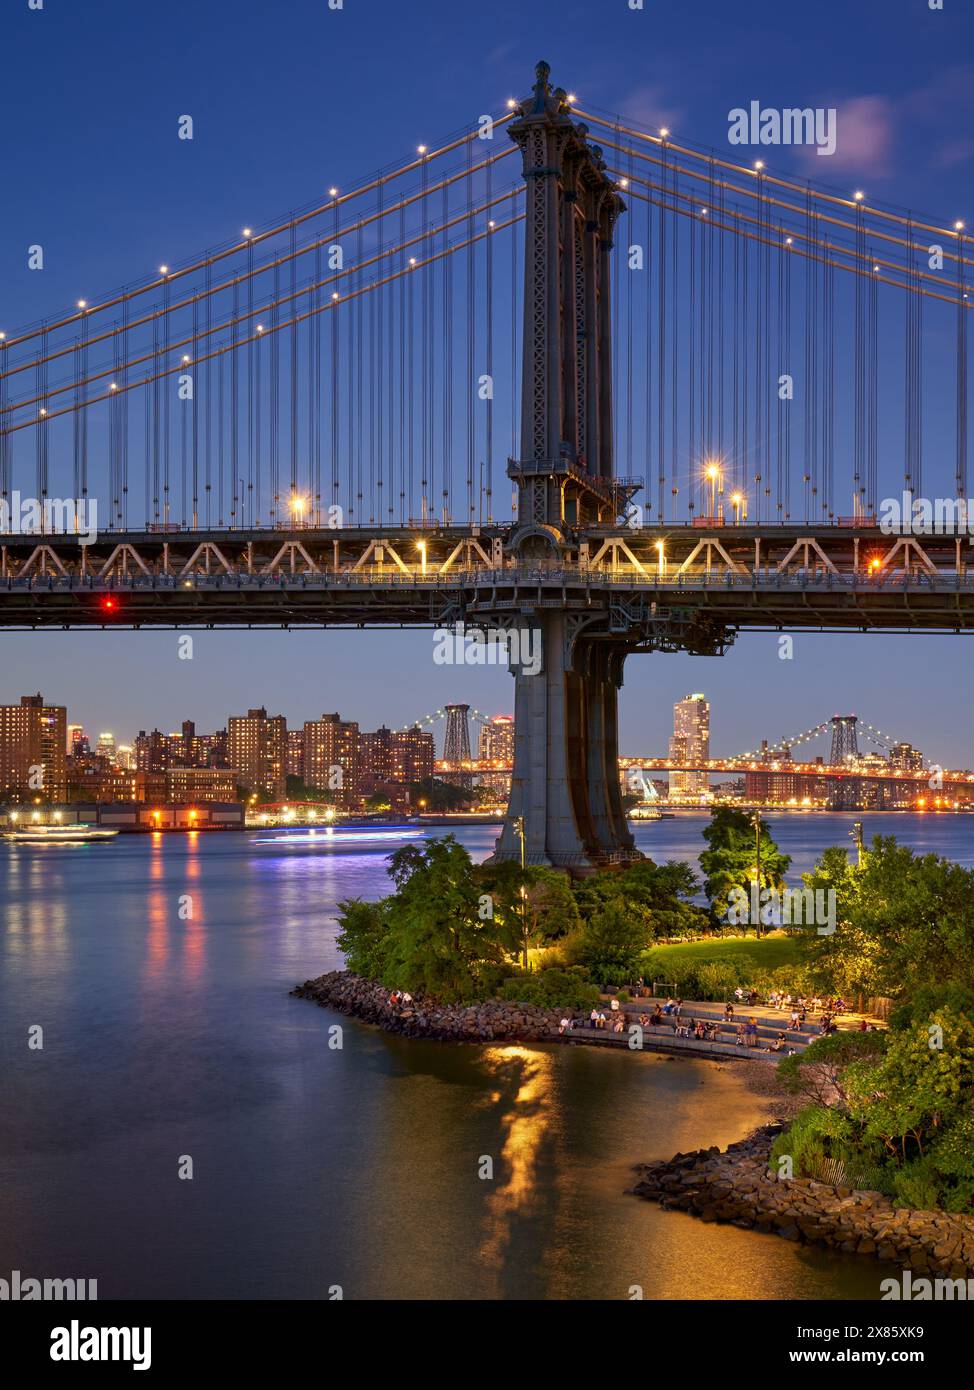 DUMBO, Brooklyn: People enjoying Main Street Park and Peble Beach in summer evening with view on the iconic Manhattan Bridge Stock Photo